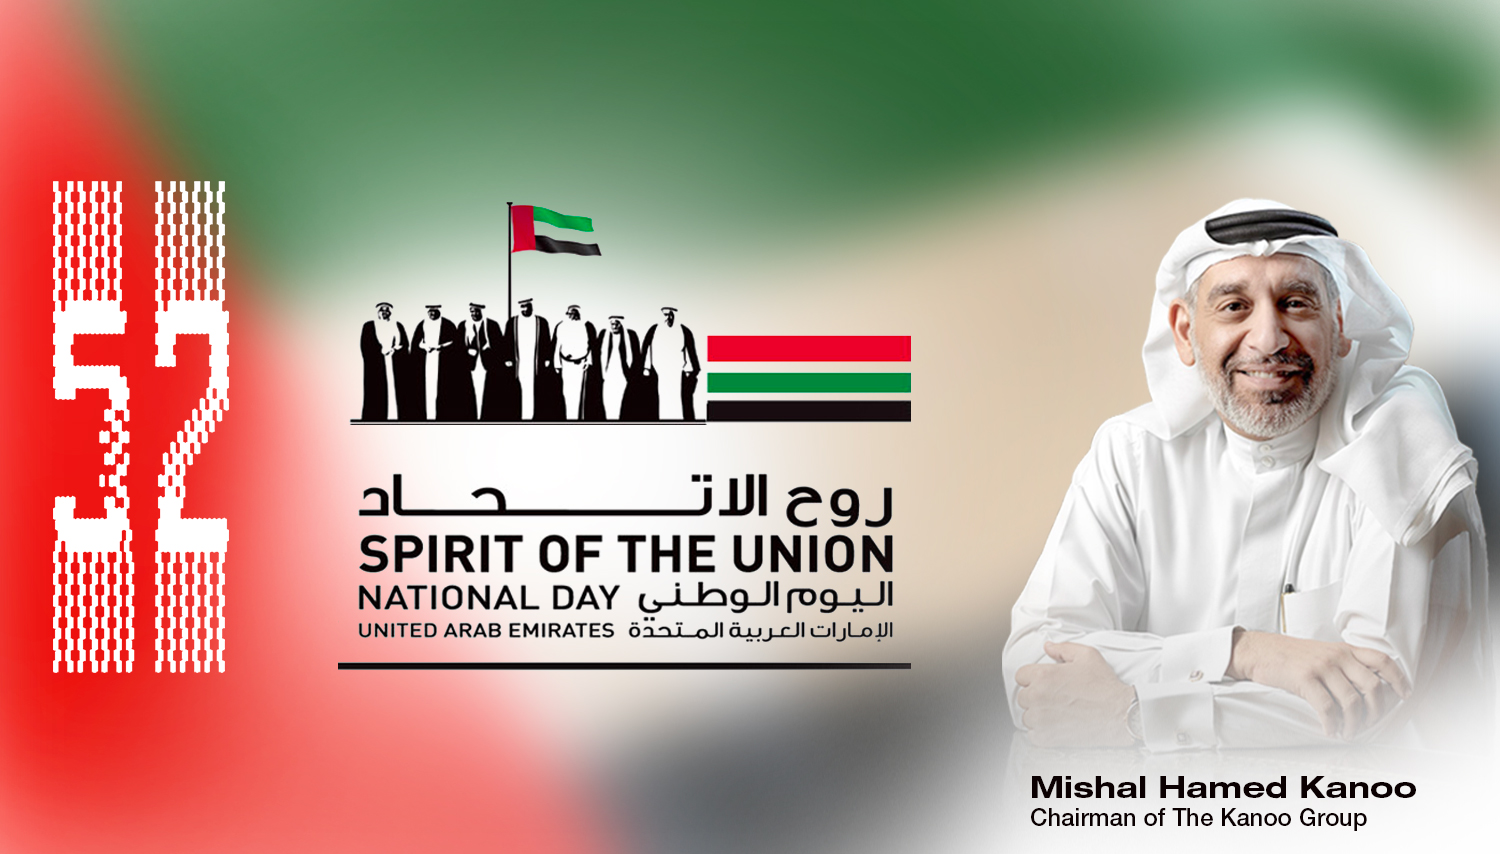 Mishal Kanoo’s Message for UAE’s 52nd National Day